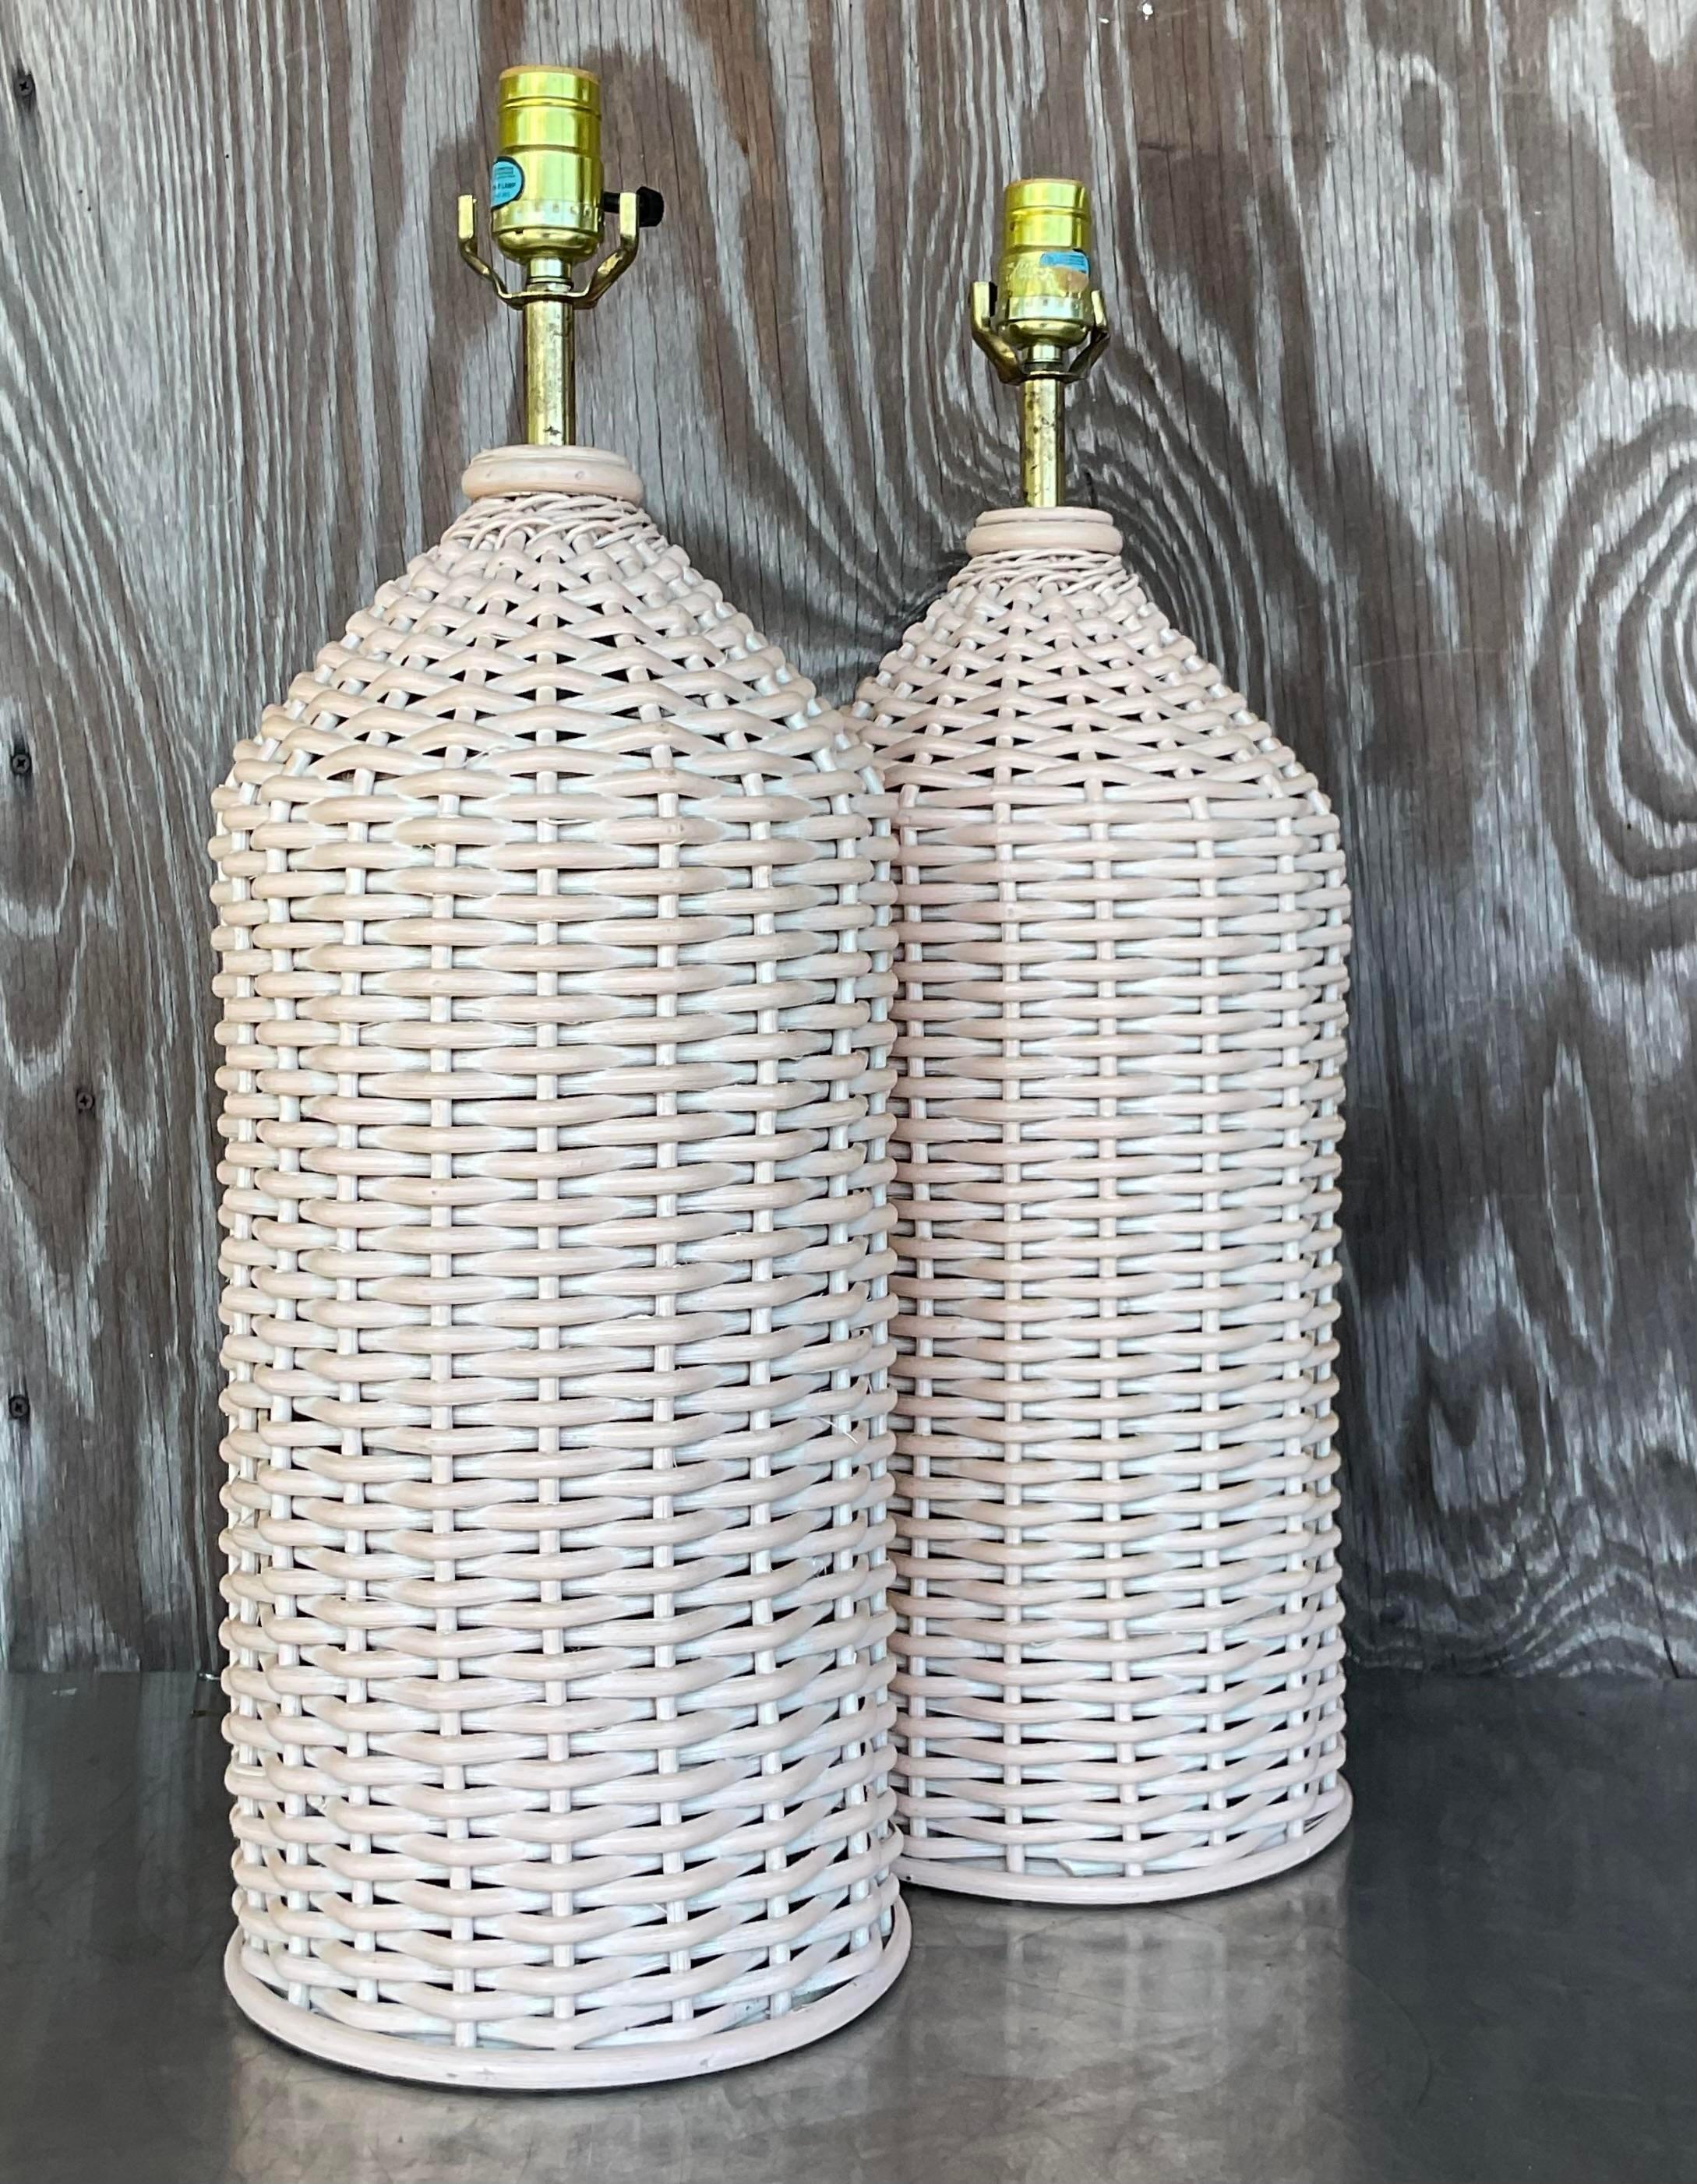 A fabulous pair of vintage Coastal table lamps. Chic woven rattan in a clean cylinder shape. A tan color with the tiniest bit of a pale pink cast. Acquired from a Palm a each estate.